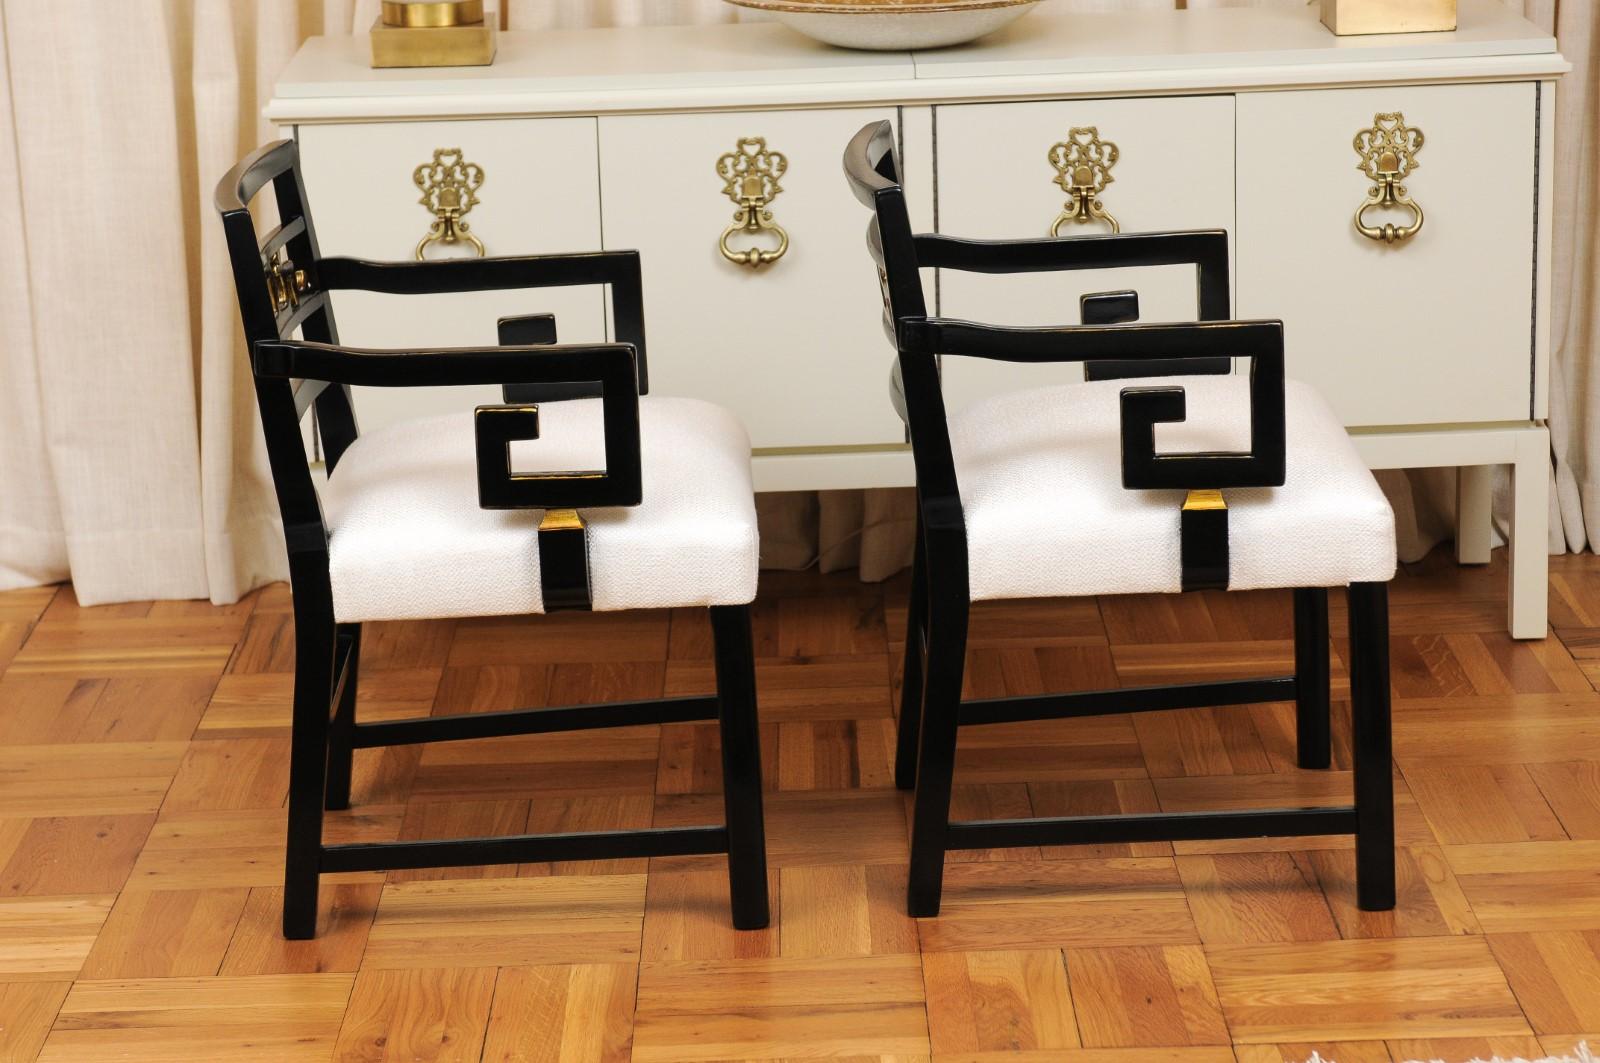 Exquisite Set of 12 Chinoiserie Greek Key Armchairs by Baker, circa 1960 For Sale 4